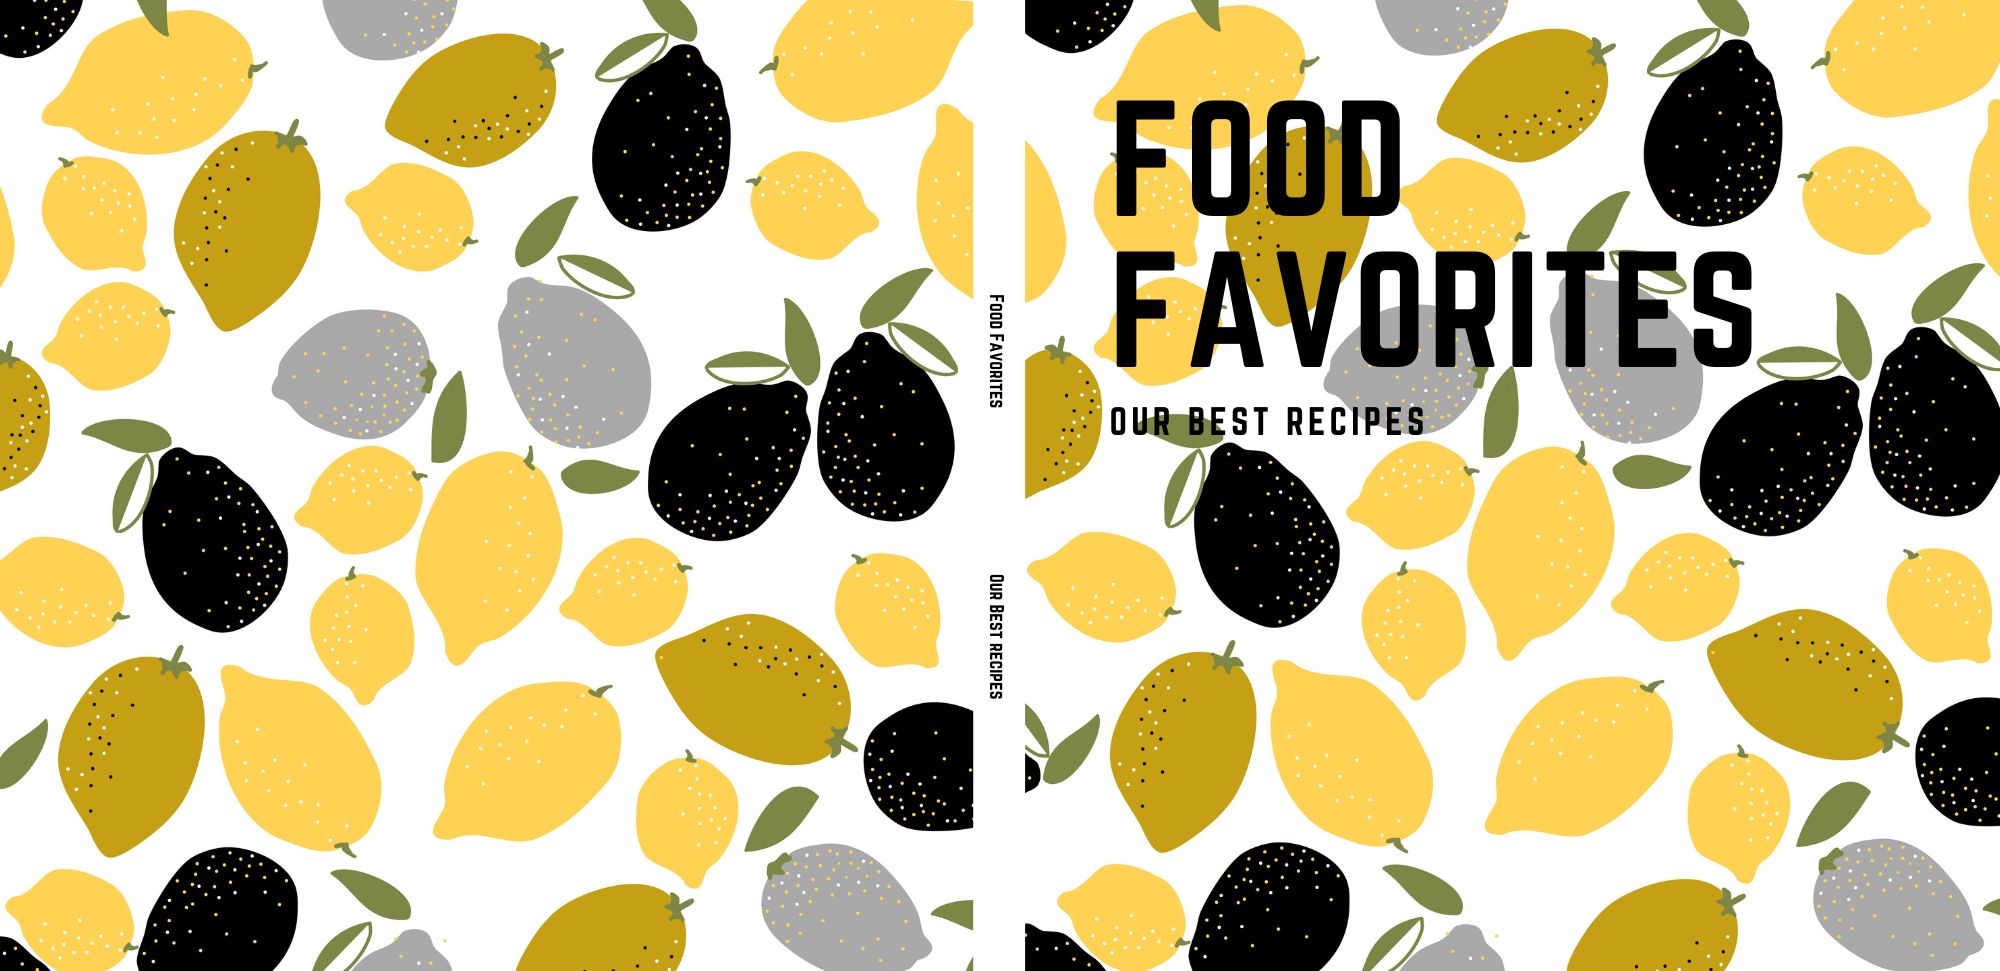 Food Favorites, Our Best Recipes Blank Journal